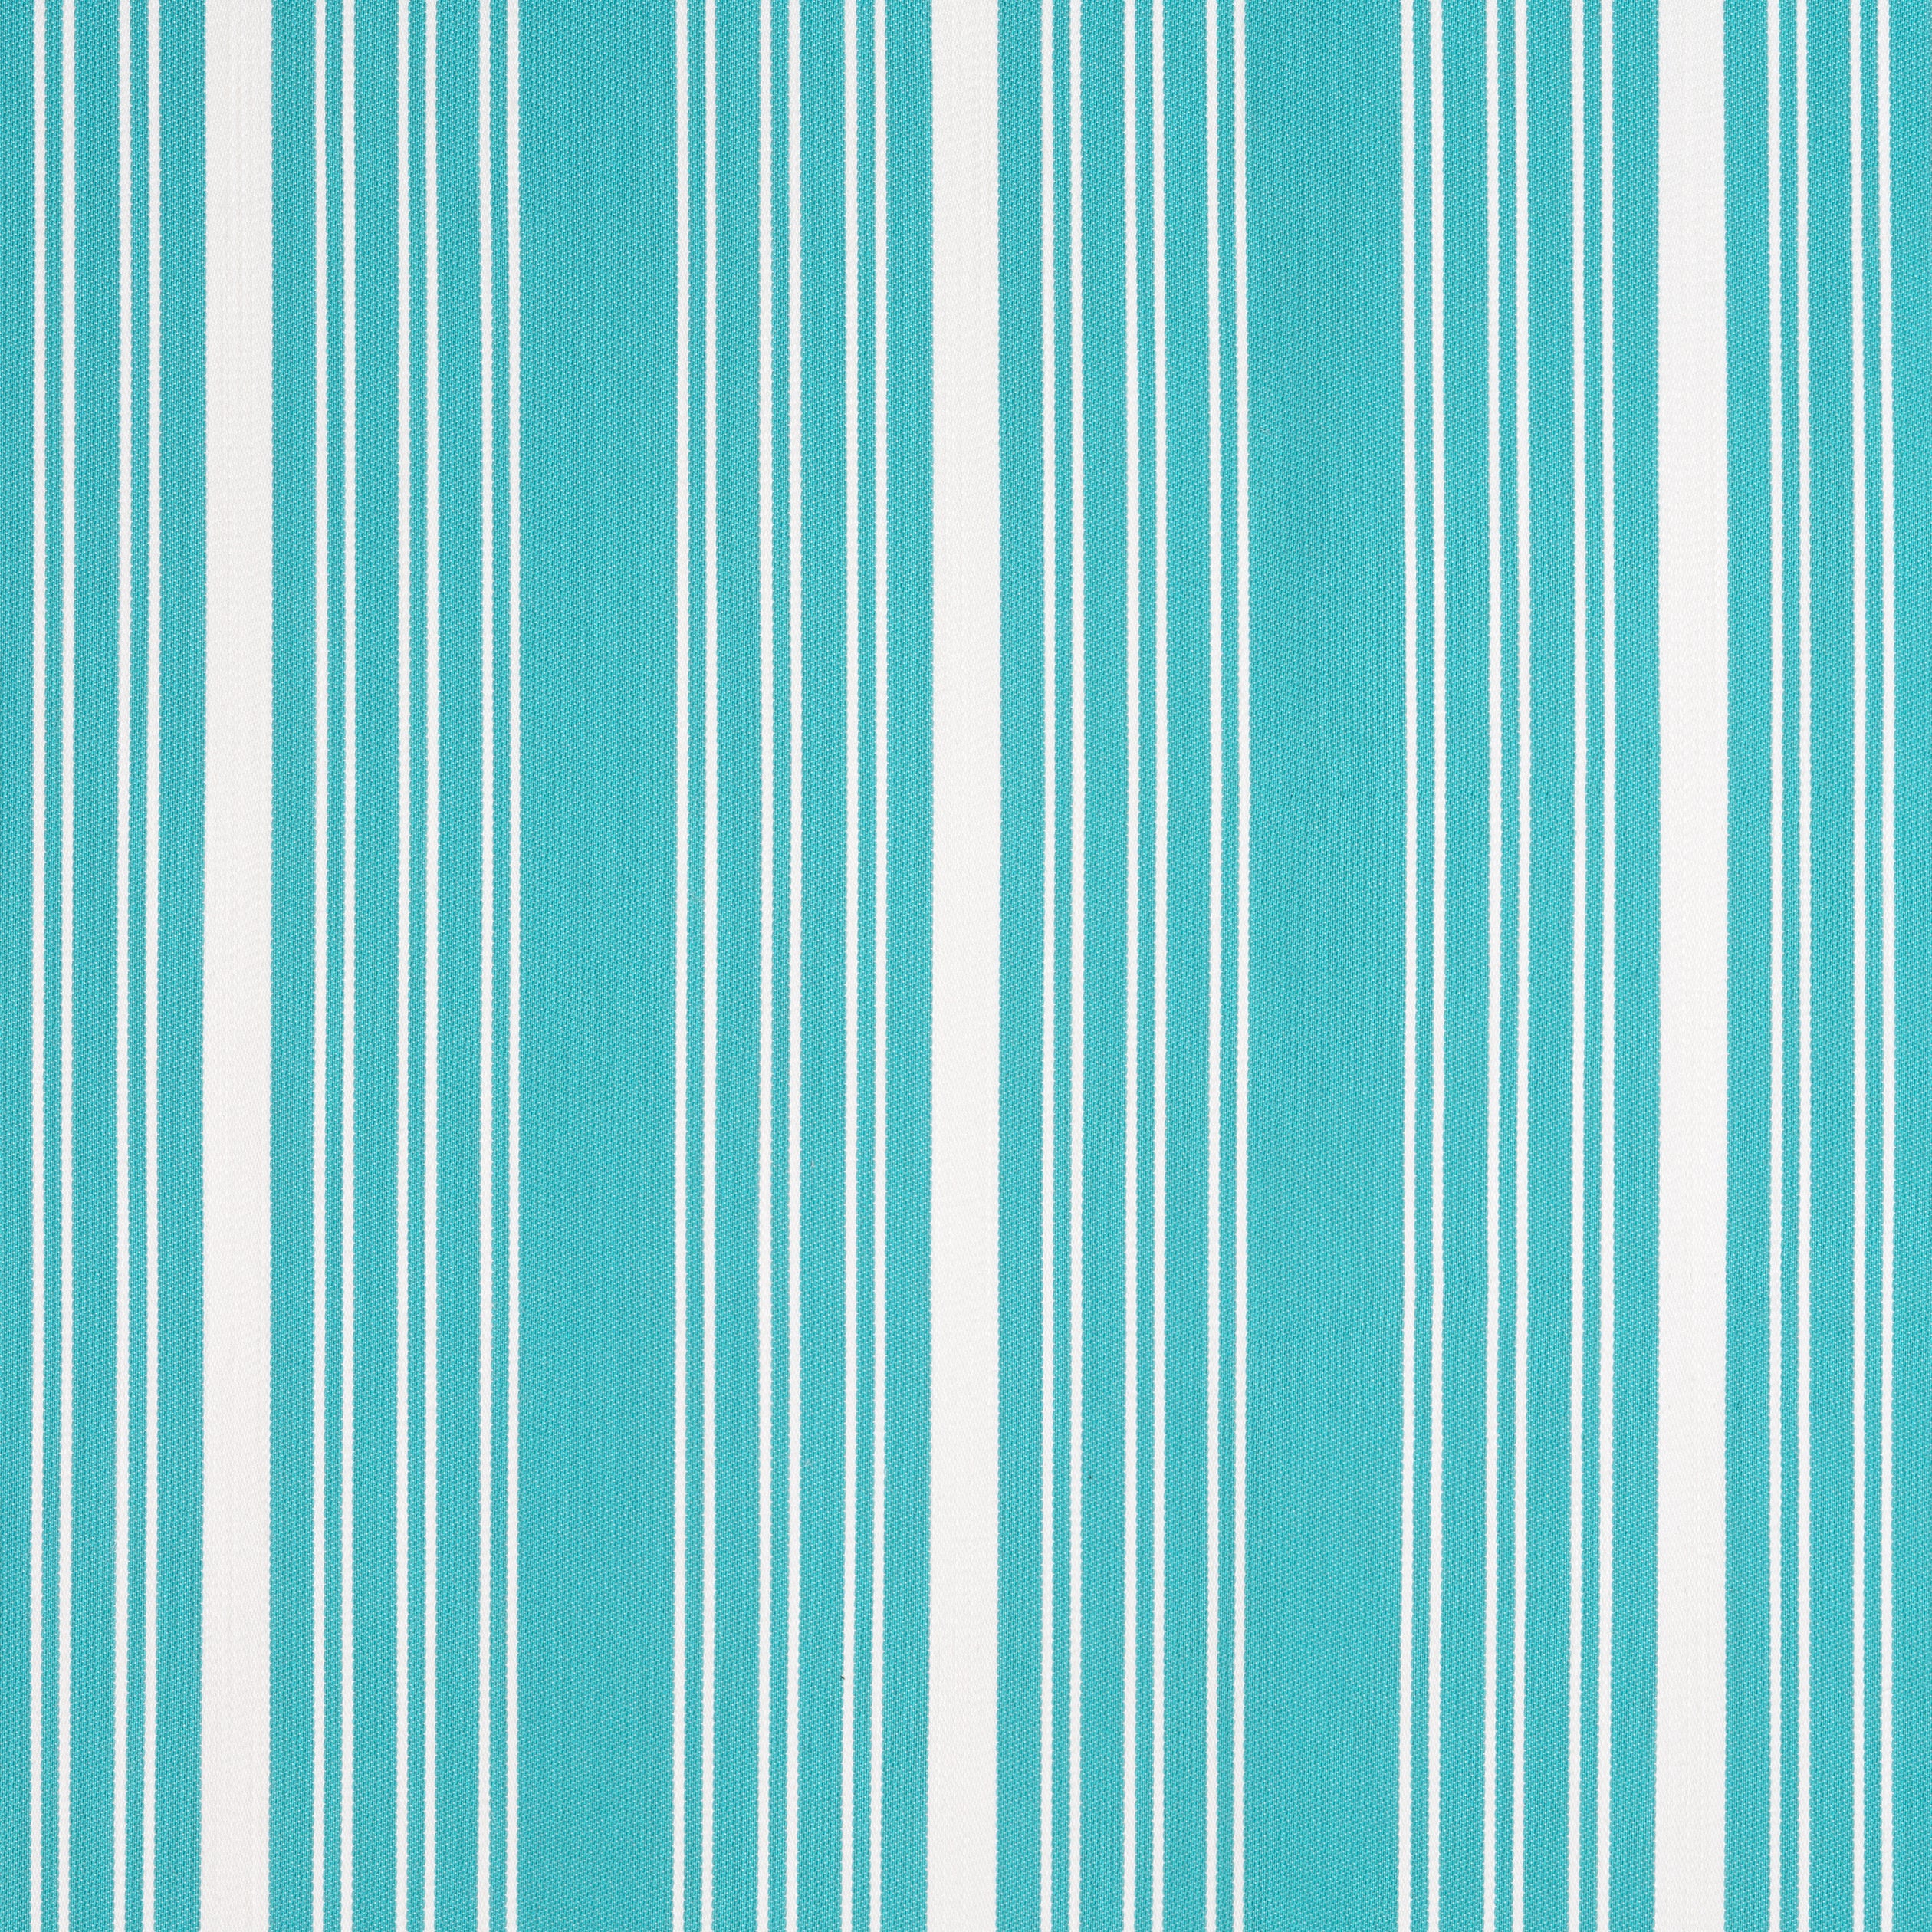 Kaia Stripe fabric in capri color - pattern number W8543 - by Thibaut in the Villa collection